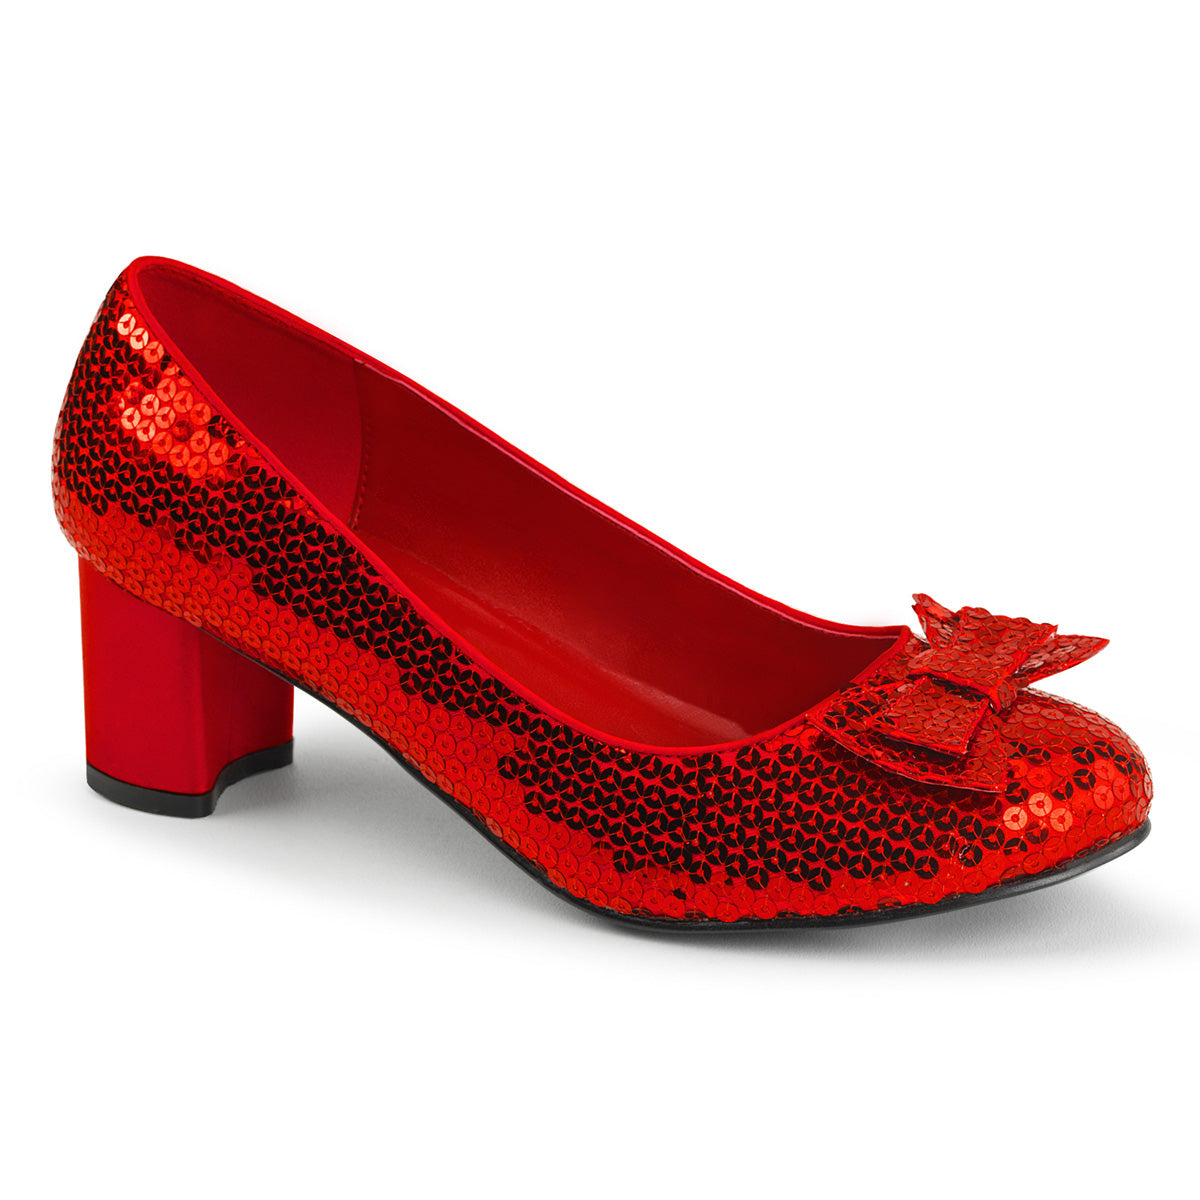 DOROTHY-01 Pleasers Funtasma 2" Heel Red Sequins Women's Sexy Shoes